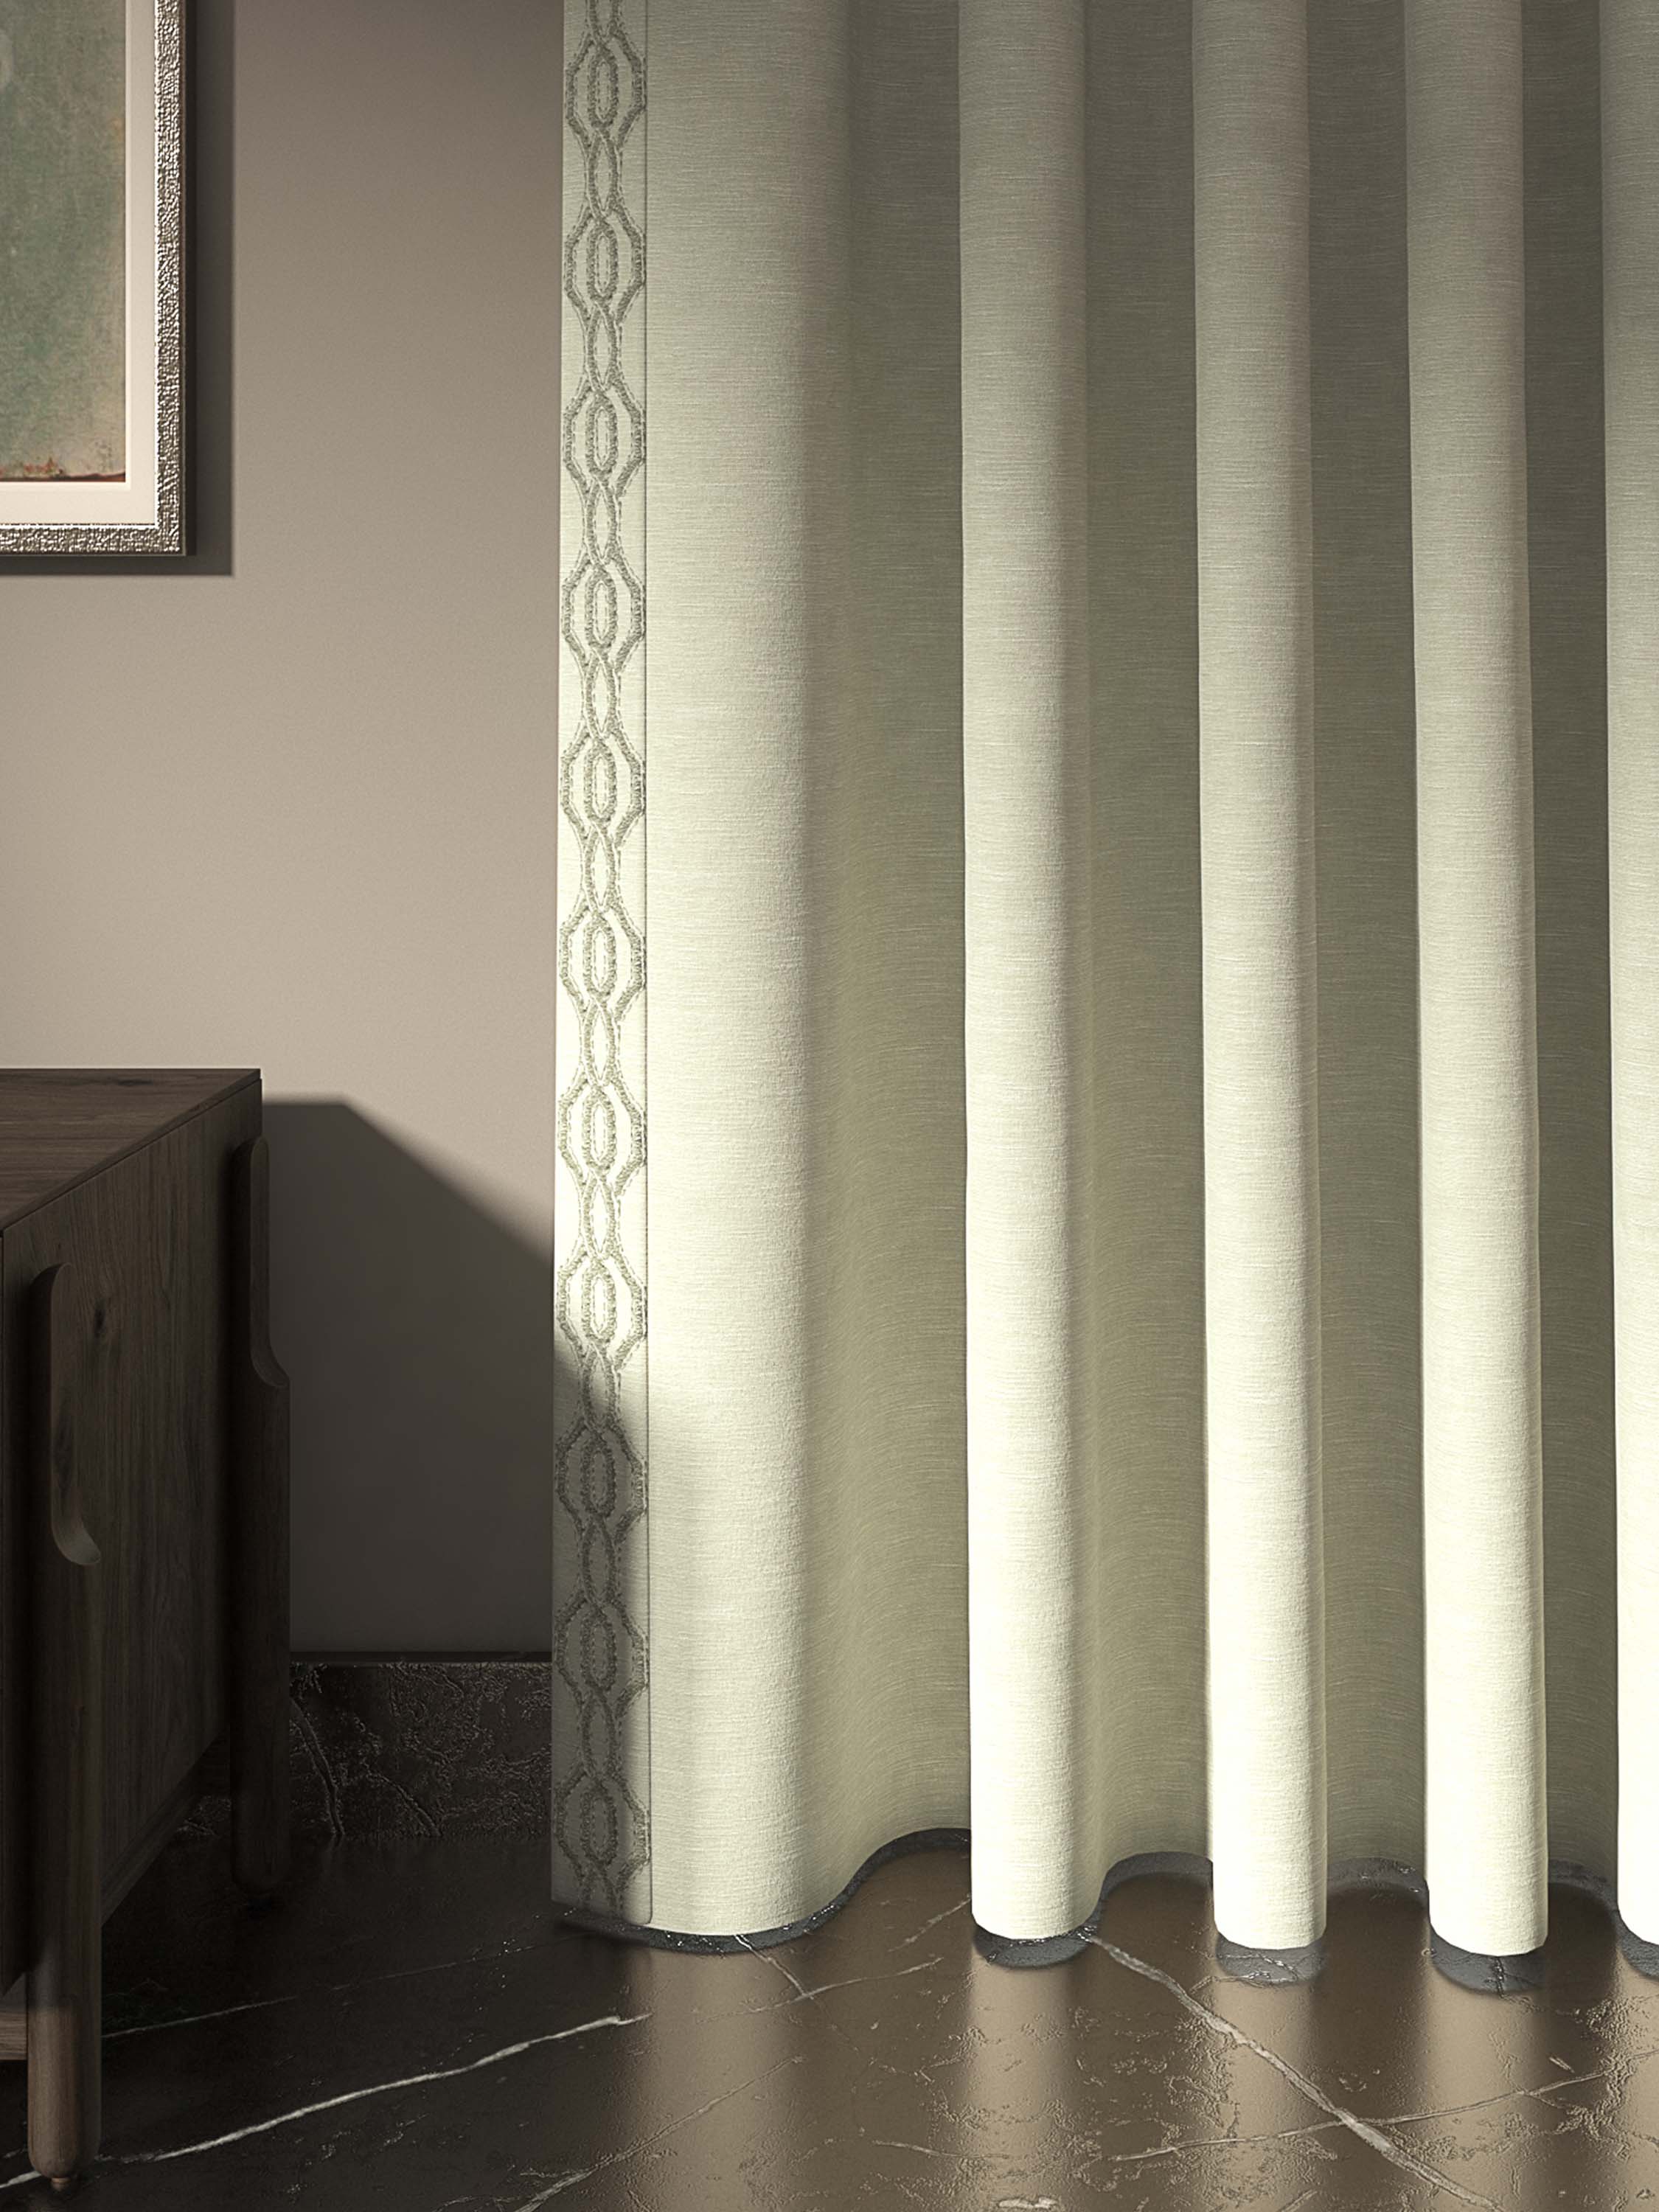  Luxury Designer Curtains with Geometric Embroidery